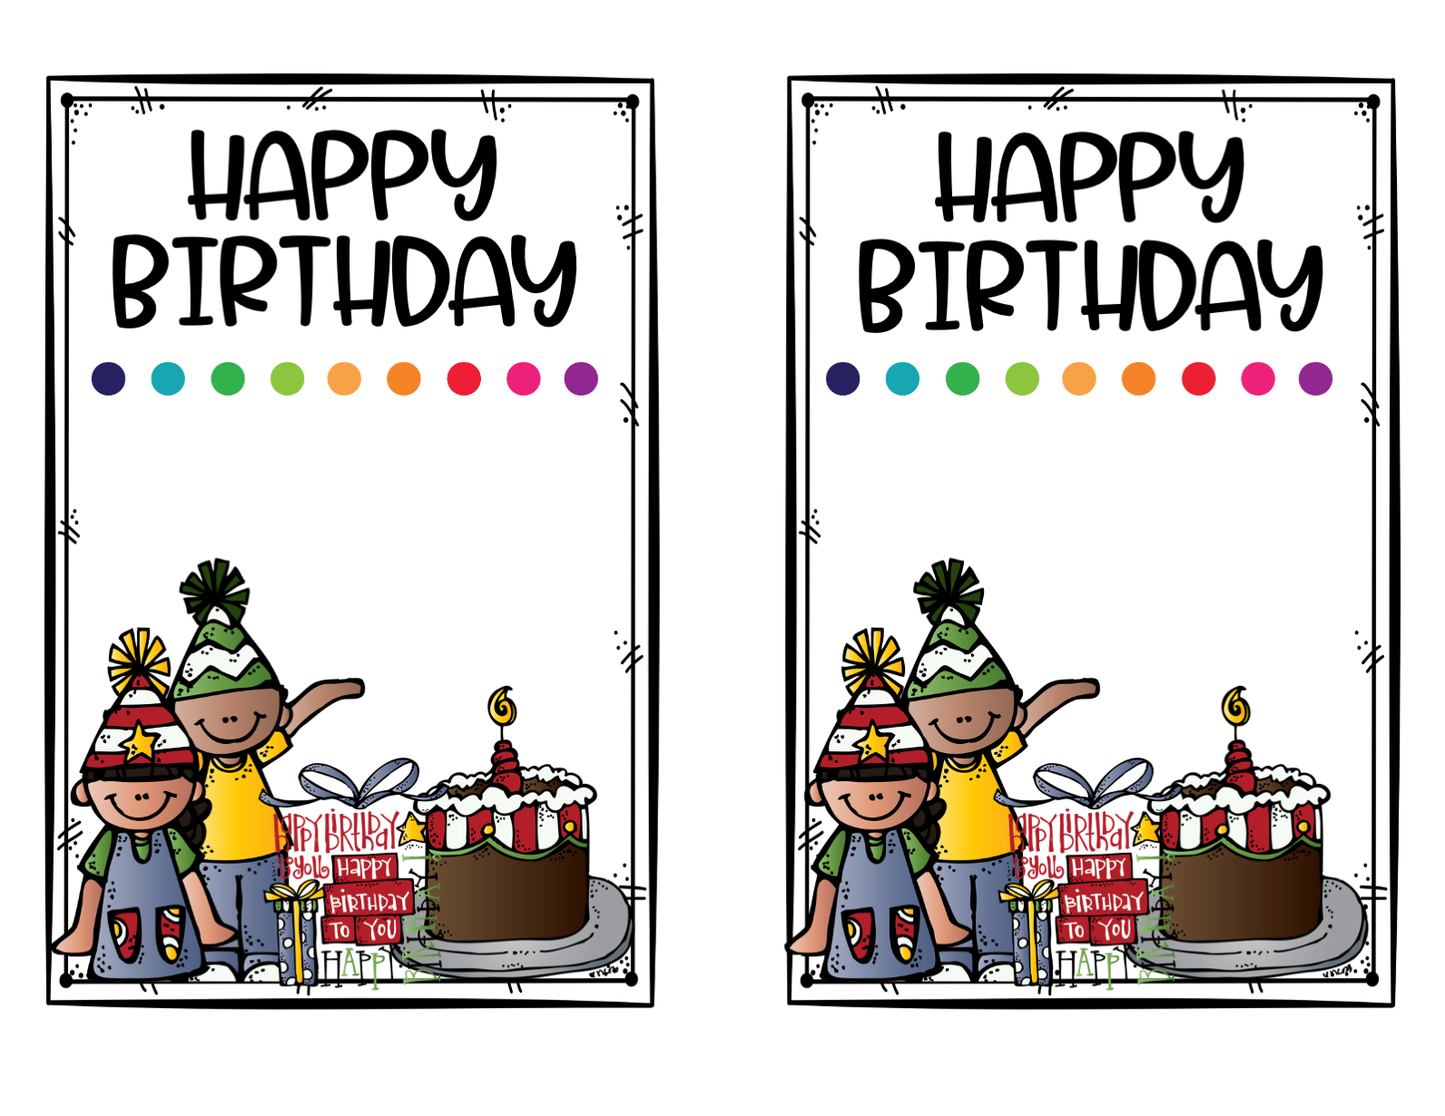 Happy Birthday Certificates | Celebrate with Style: Editable and Personalized